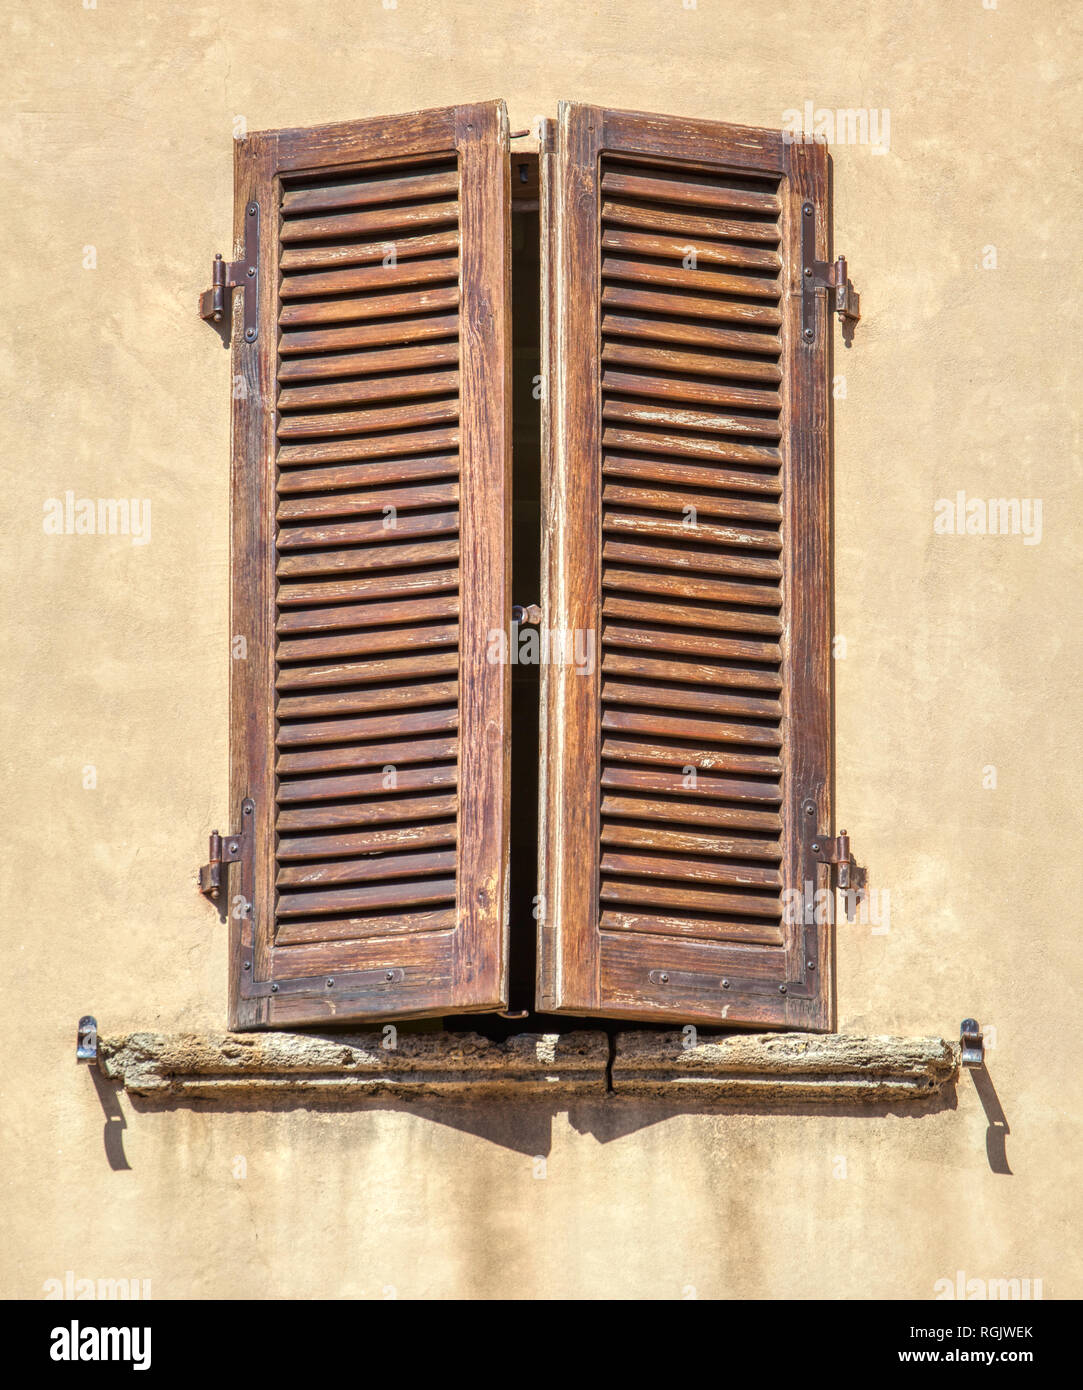 Photograph of a weathered, wood brown window shutter with black wrought iron hinges against a faded yellow plaster wall. Stock Photo